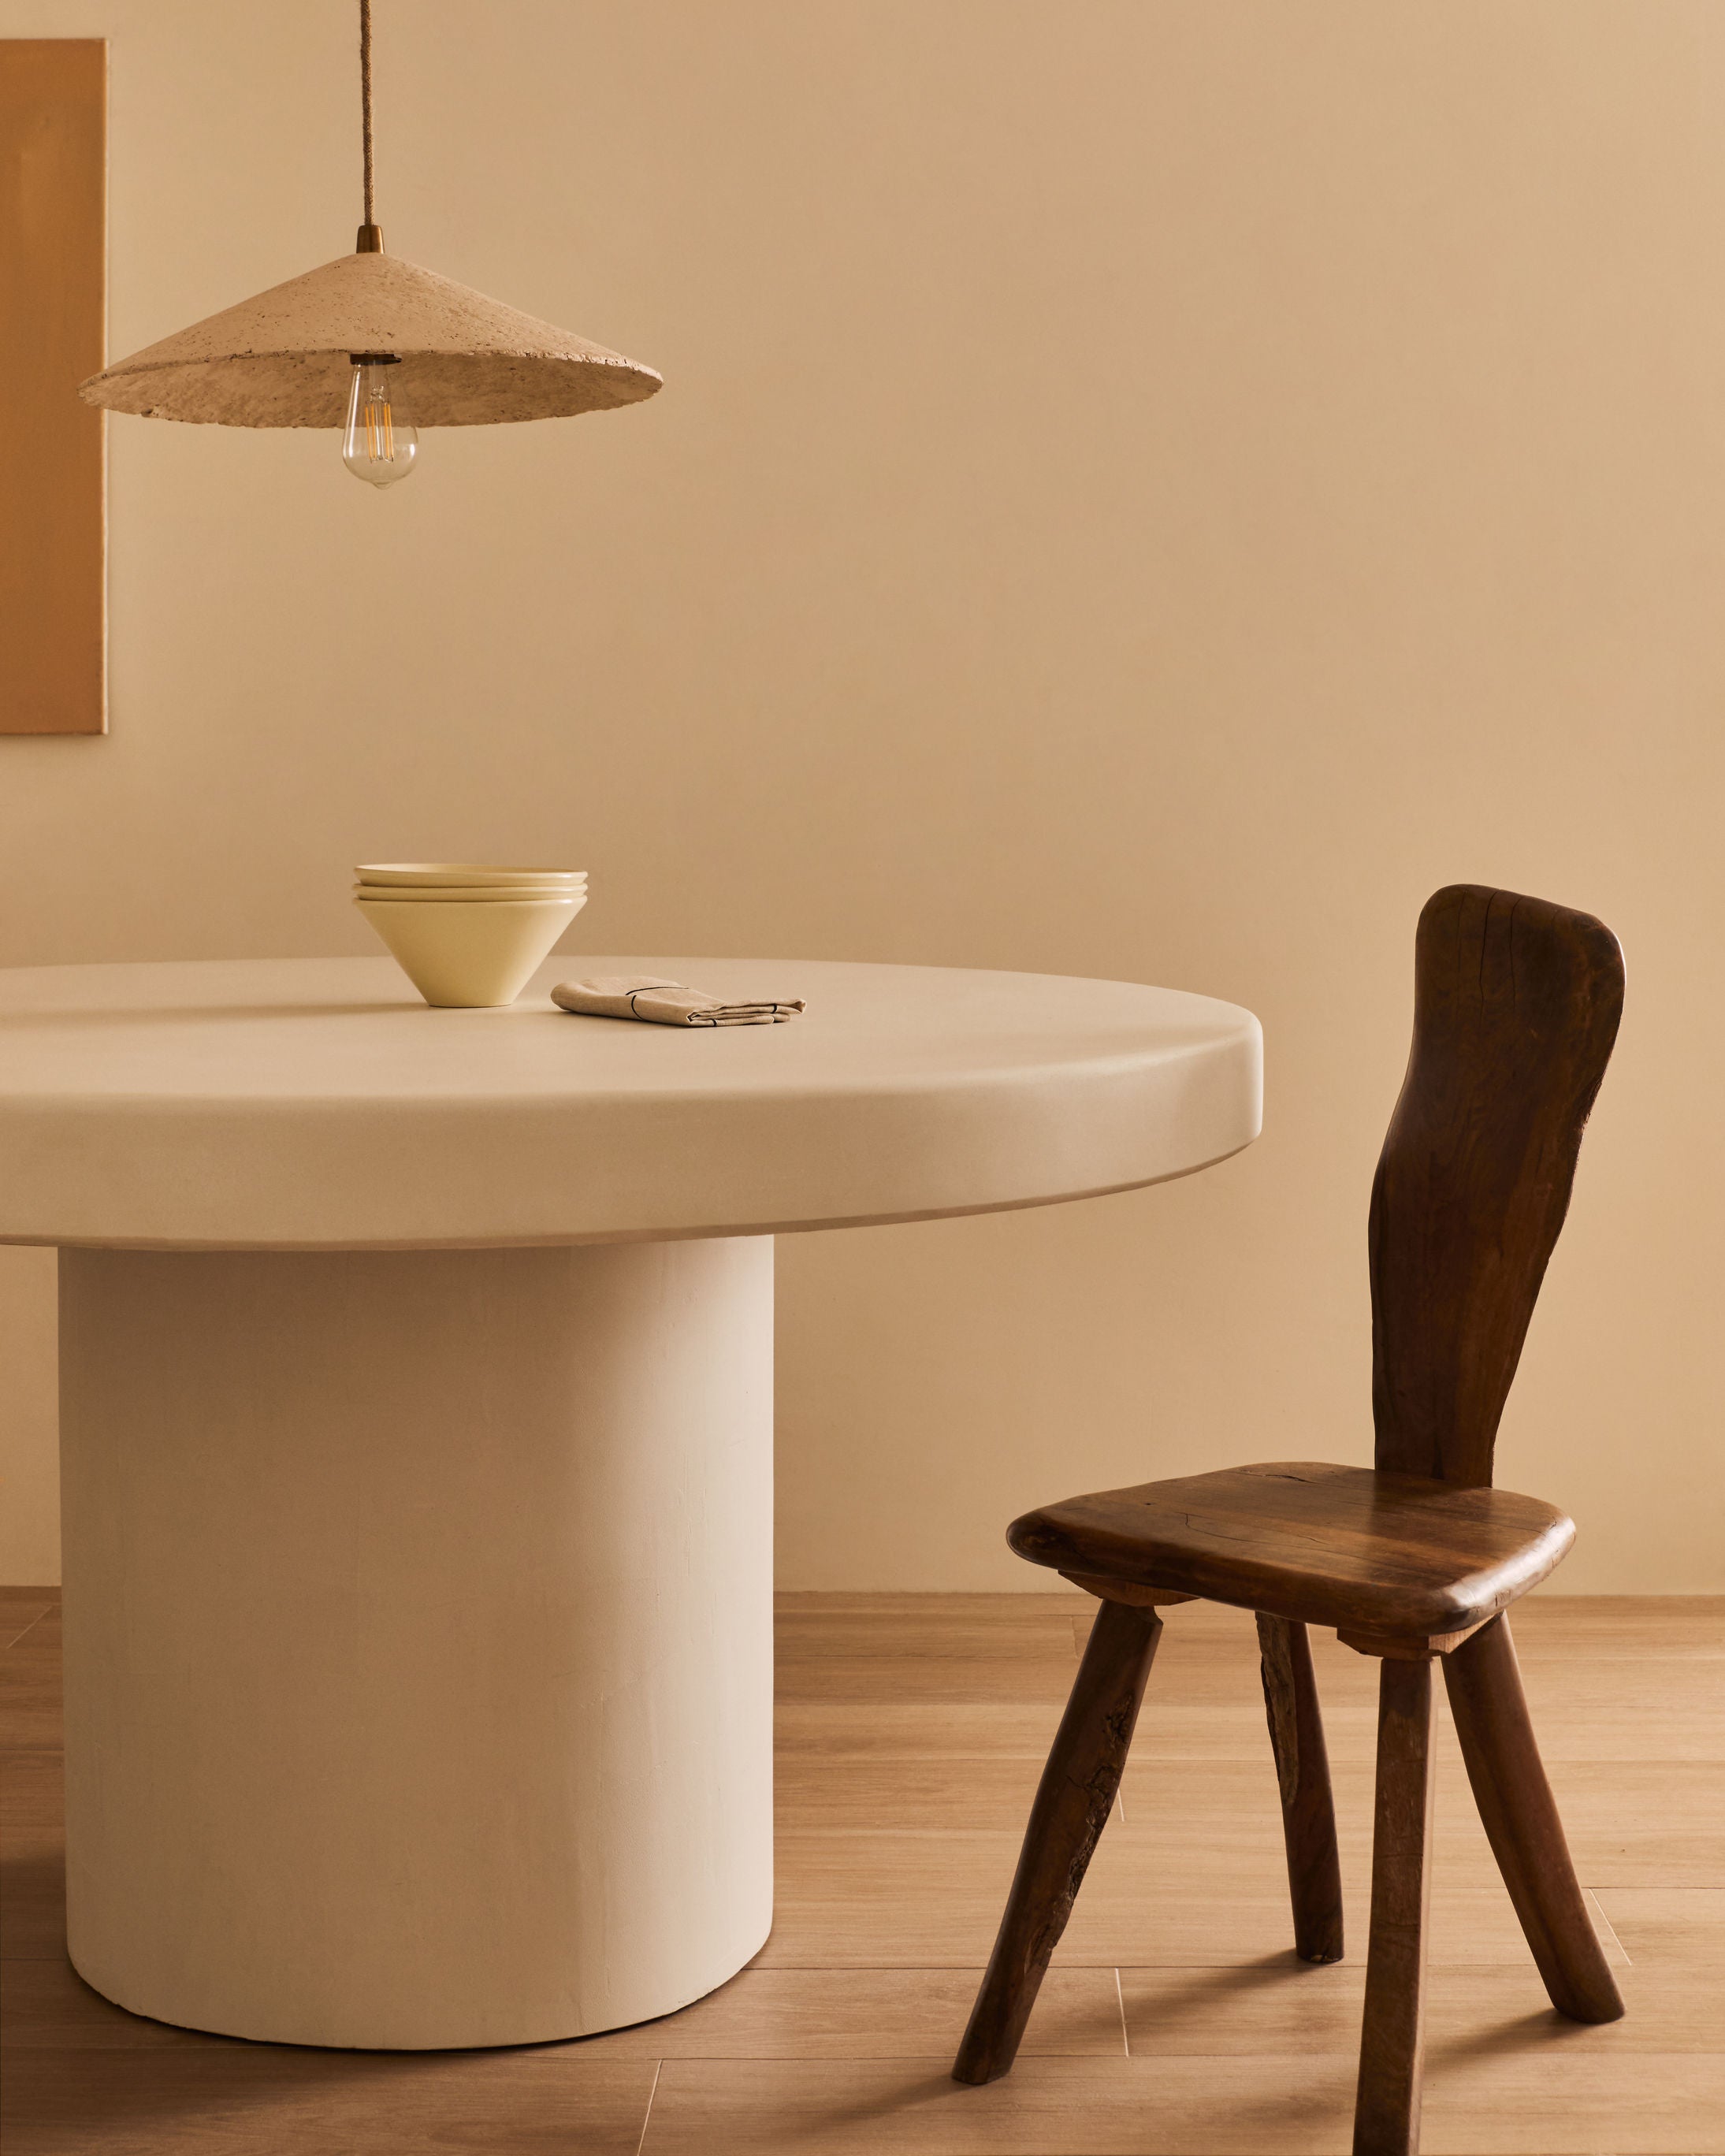 Rectangular Persillé dining table with smooth polished surface and sturdy base legs